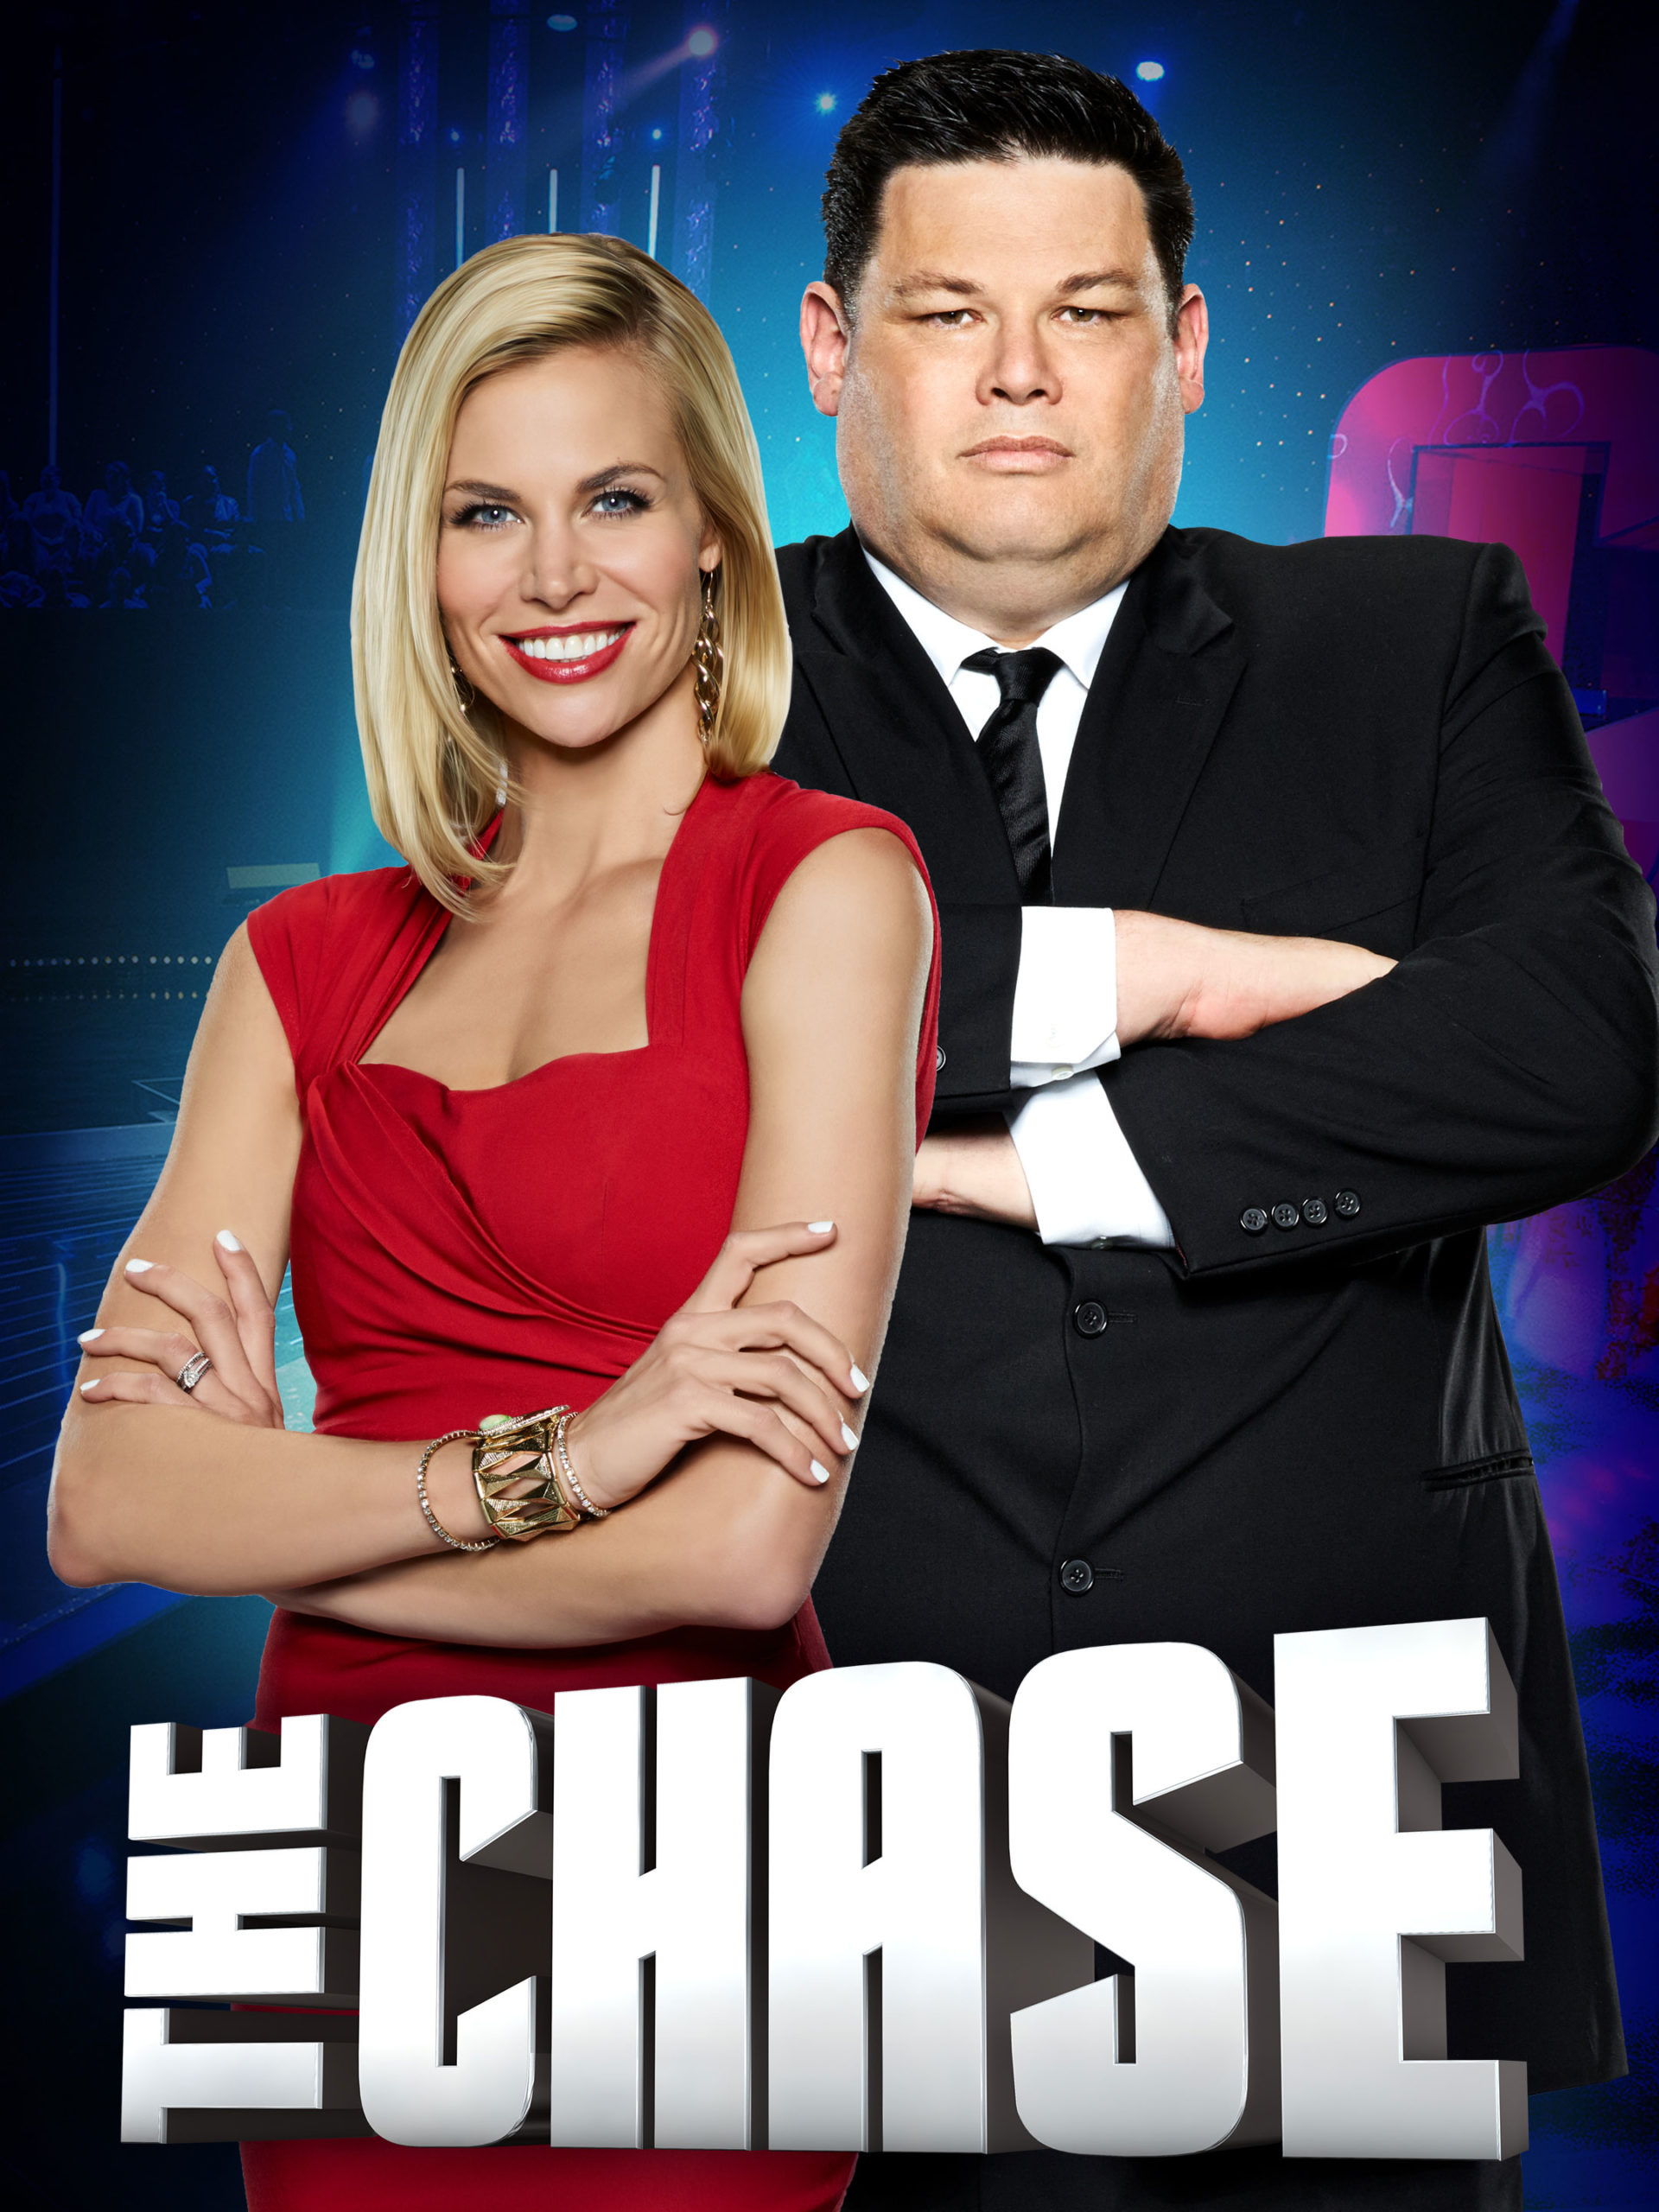 The Chase Show Hosts Chasers Pay! How Much Do They Actually Get Paid?